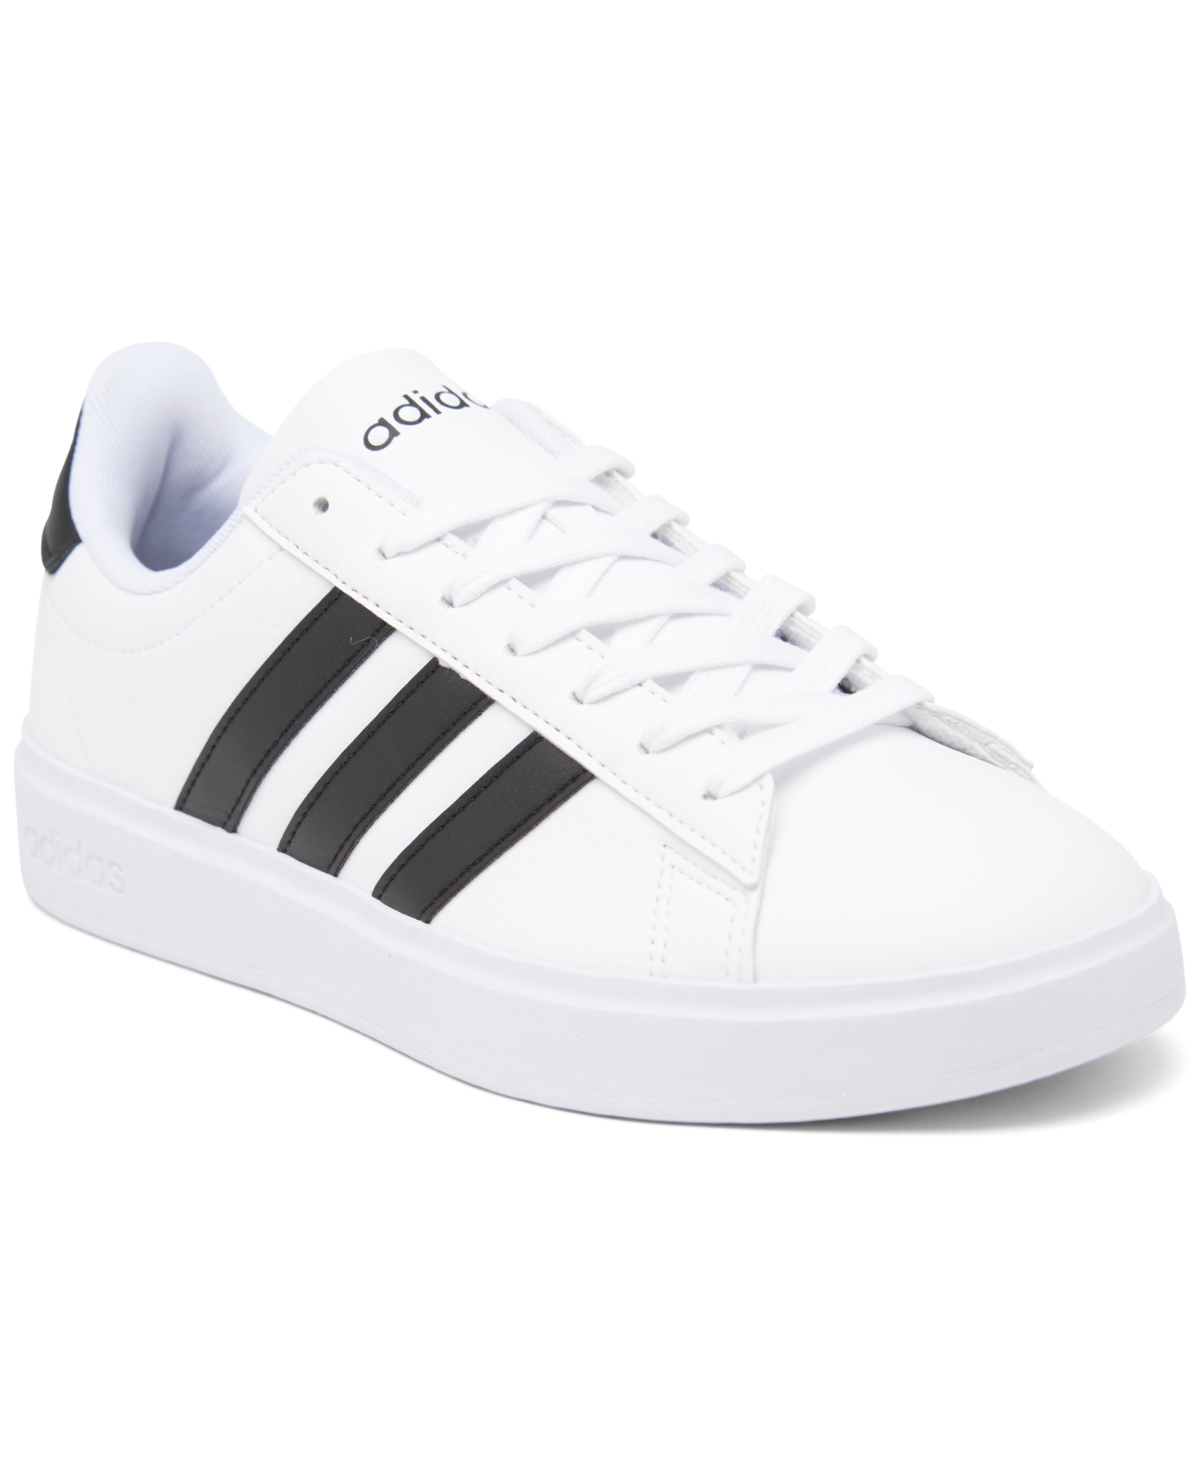 Adidas Originals Women's Grand Court Cloudfoam Lifestyle Court Comfort Casual Sneakers From Finish Line In White,core Black